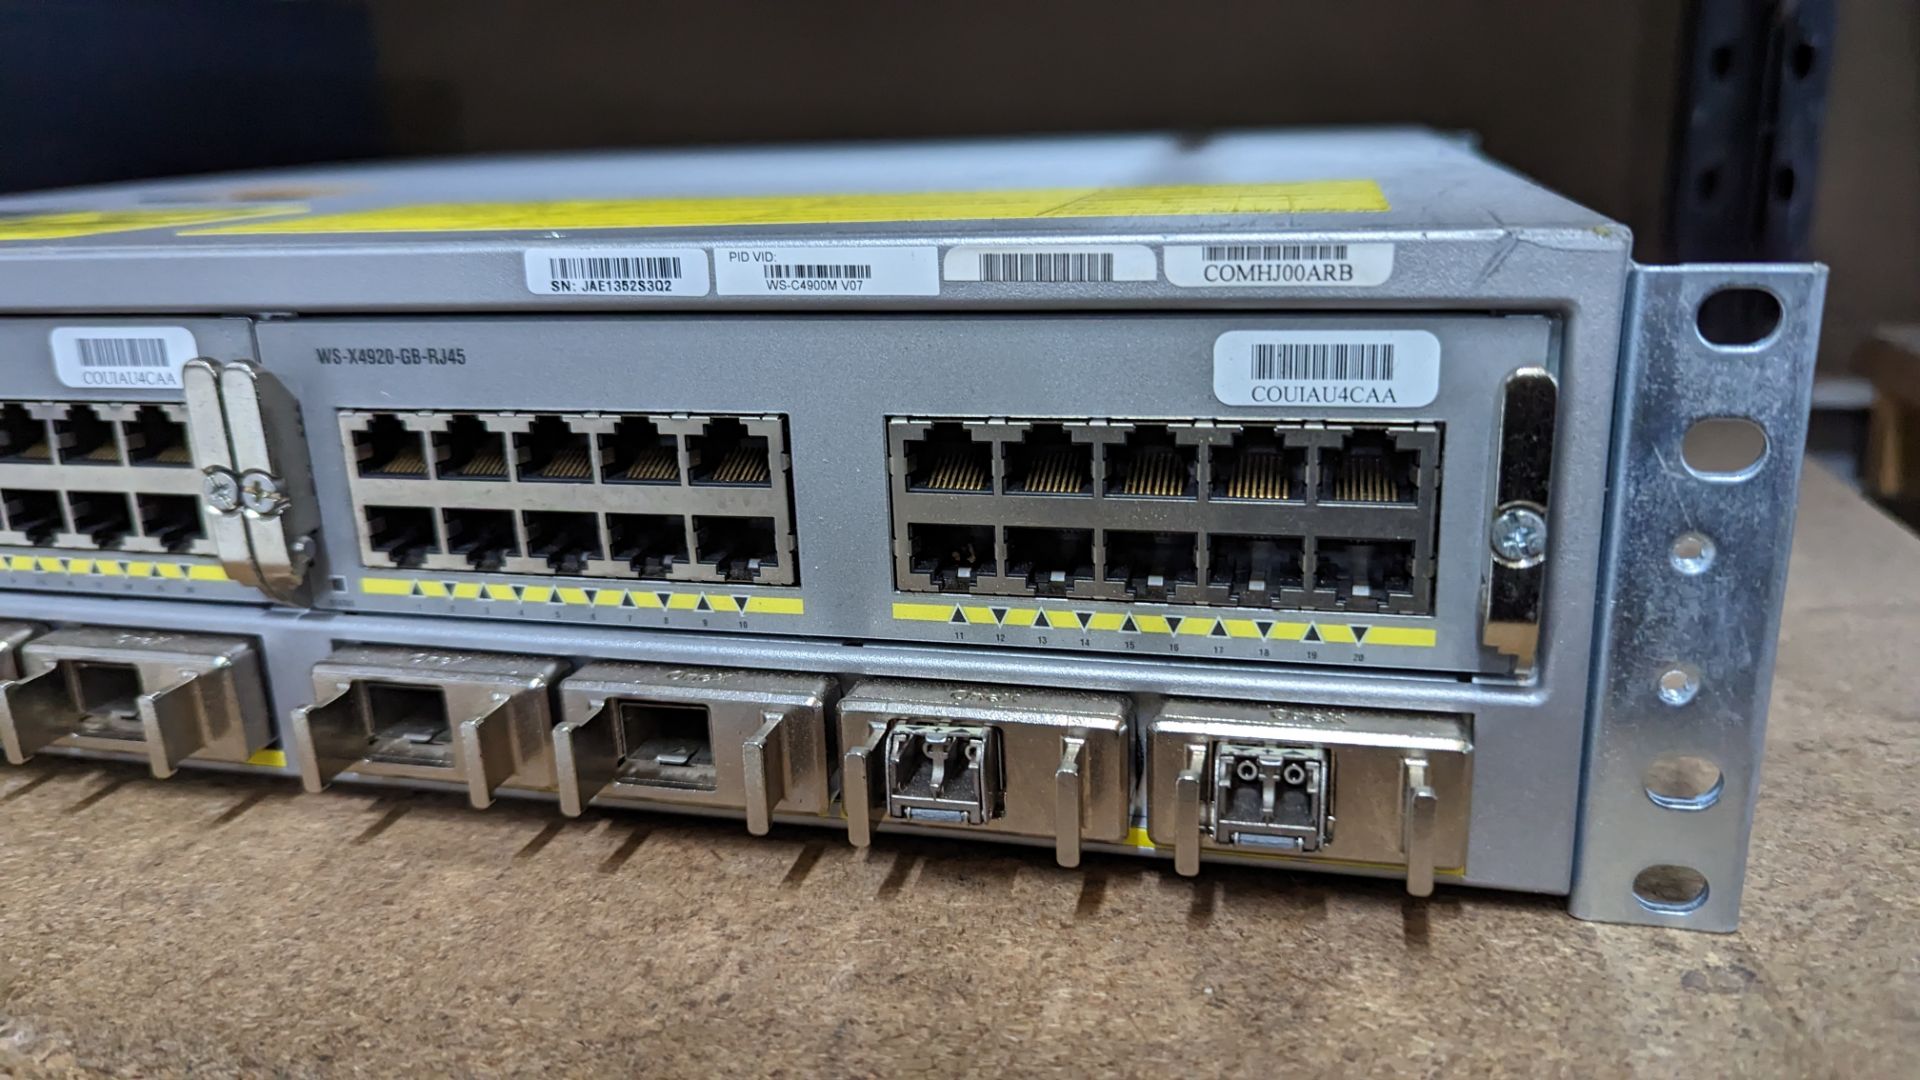 Cisco Catalyst 4900M model WS-C4900M switch with 2 off WS-X4920-GB-12J45 modules - Image 4 of 7